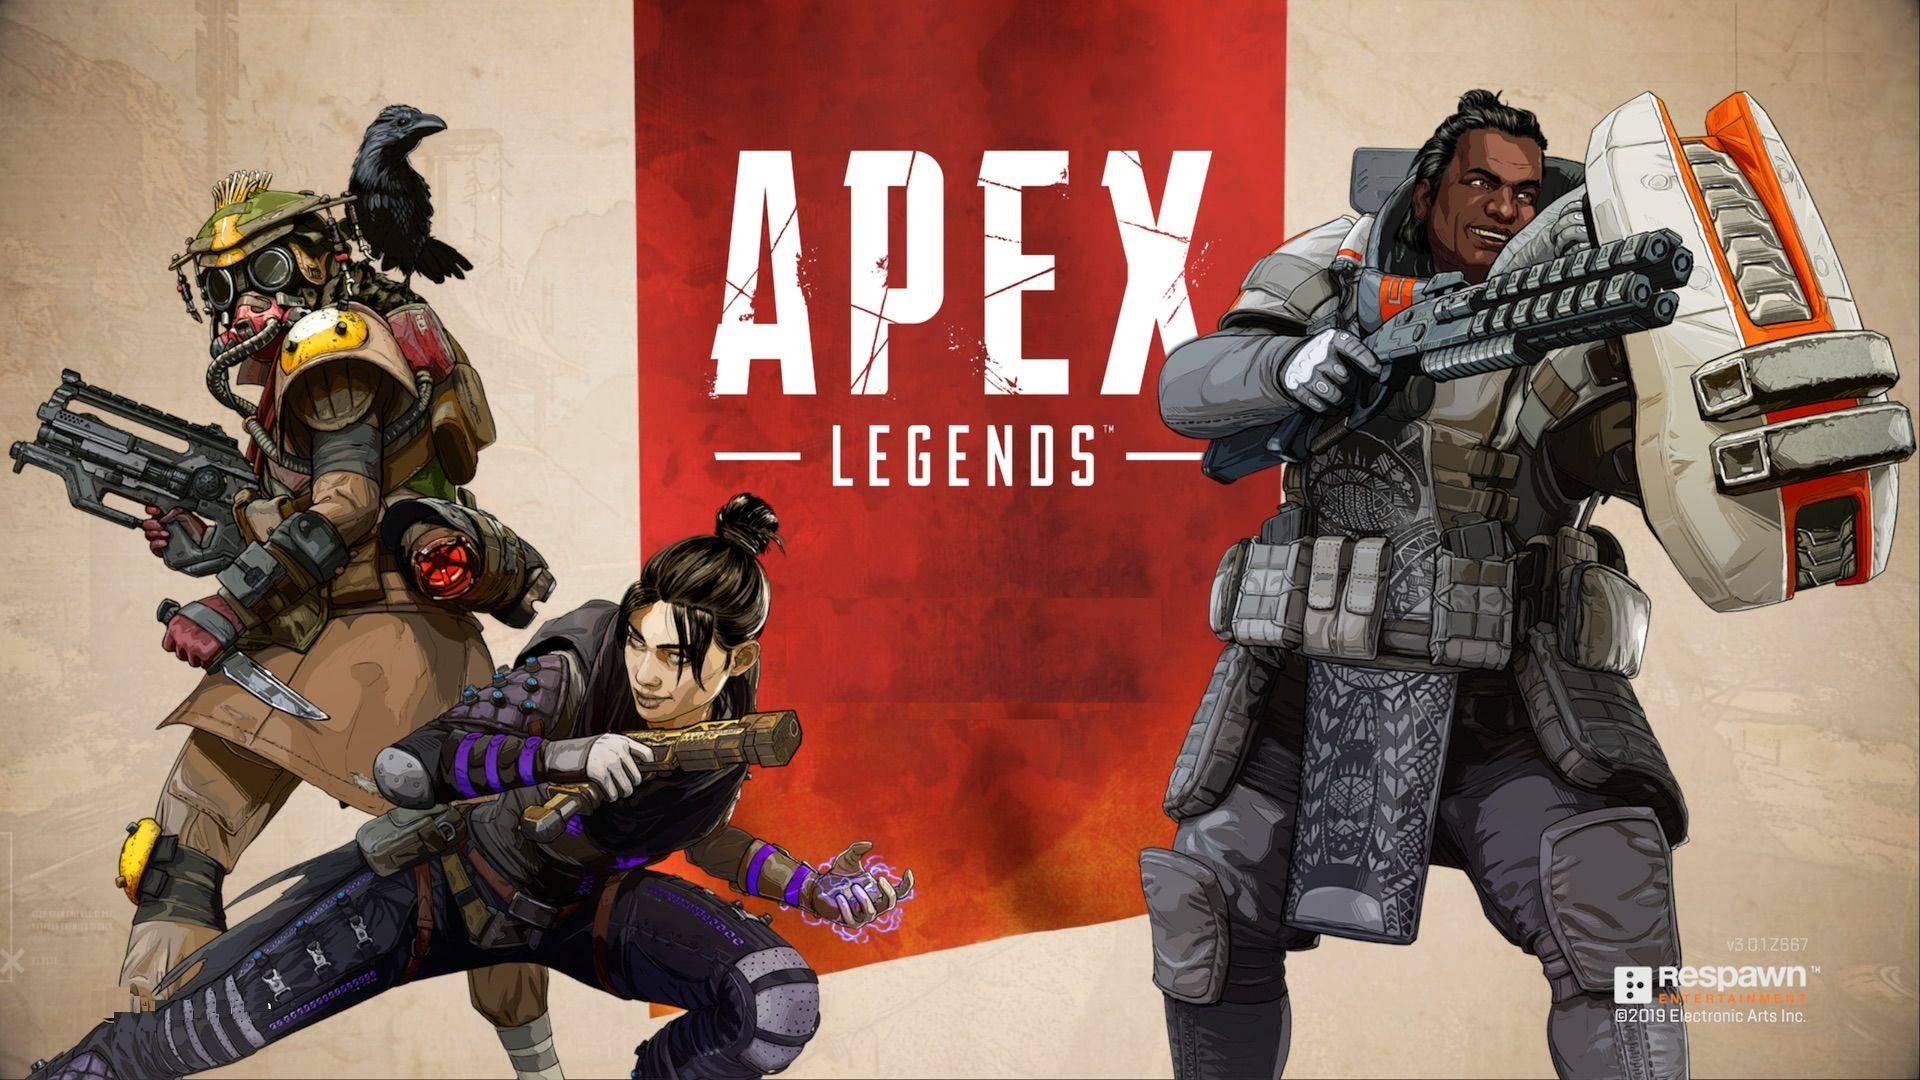 Apex Legends Got 2.5M+ Users in First 24 Hours; EA Hopes It'll Grow